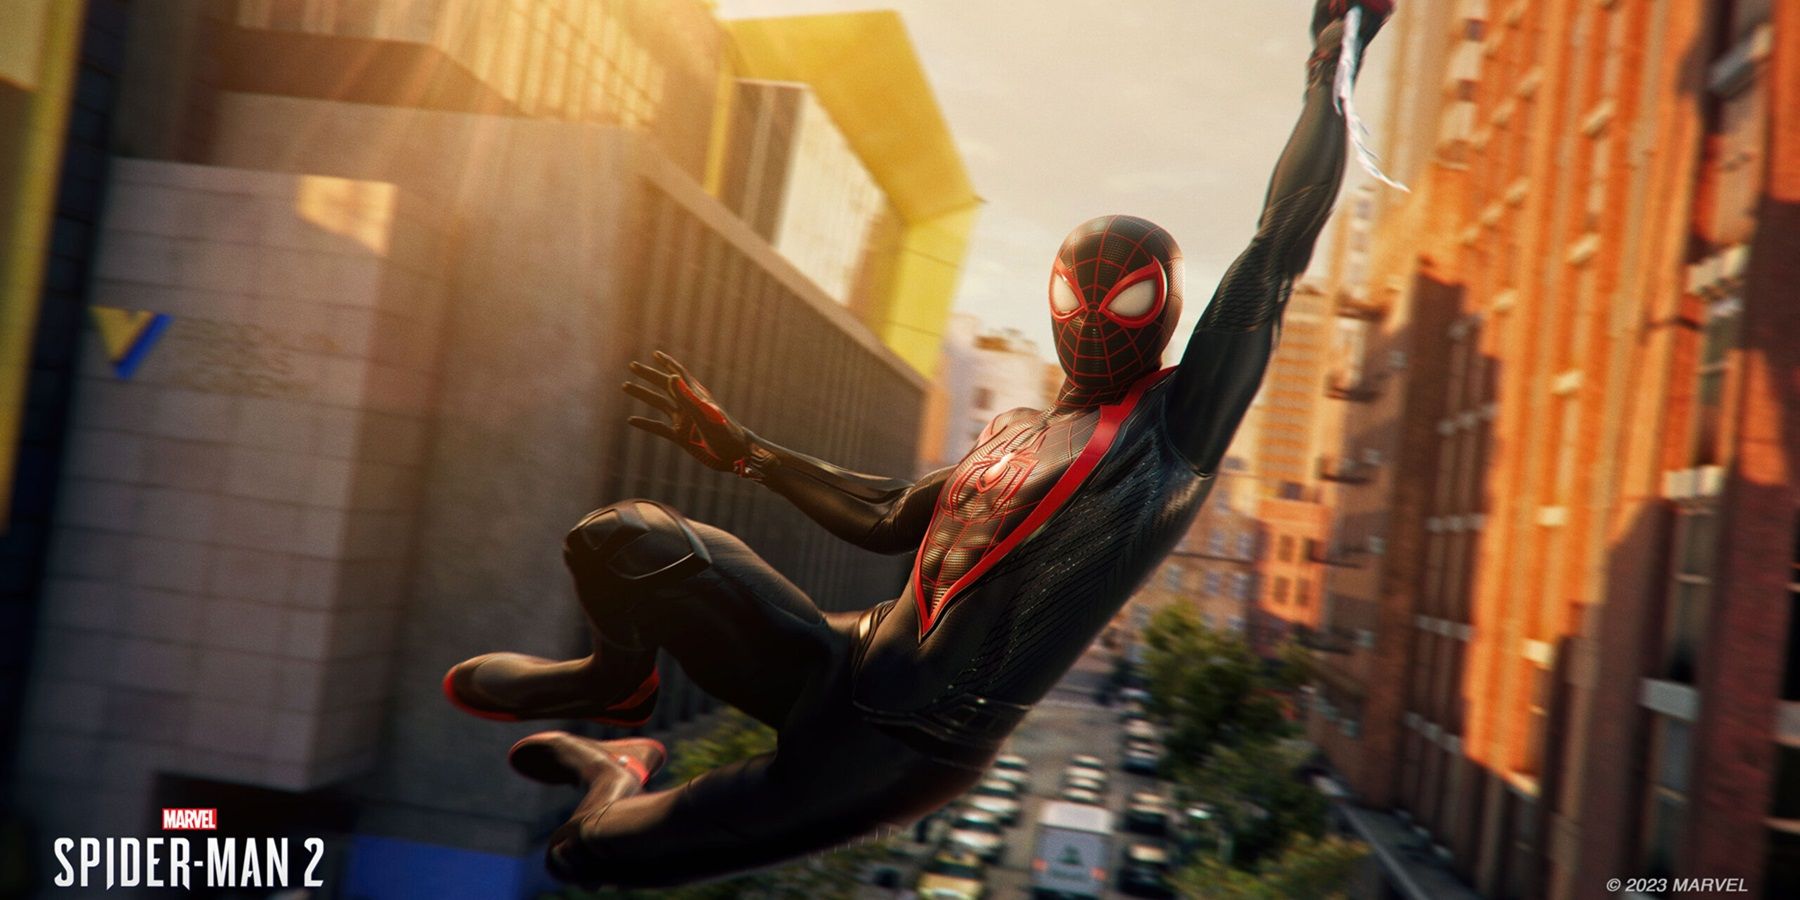 Warning to millions of Spider-Man fans – here's the game-breaking bug  you'll want to avoid